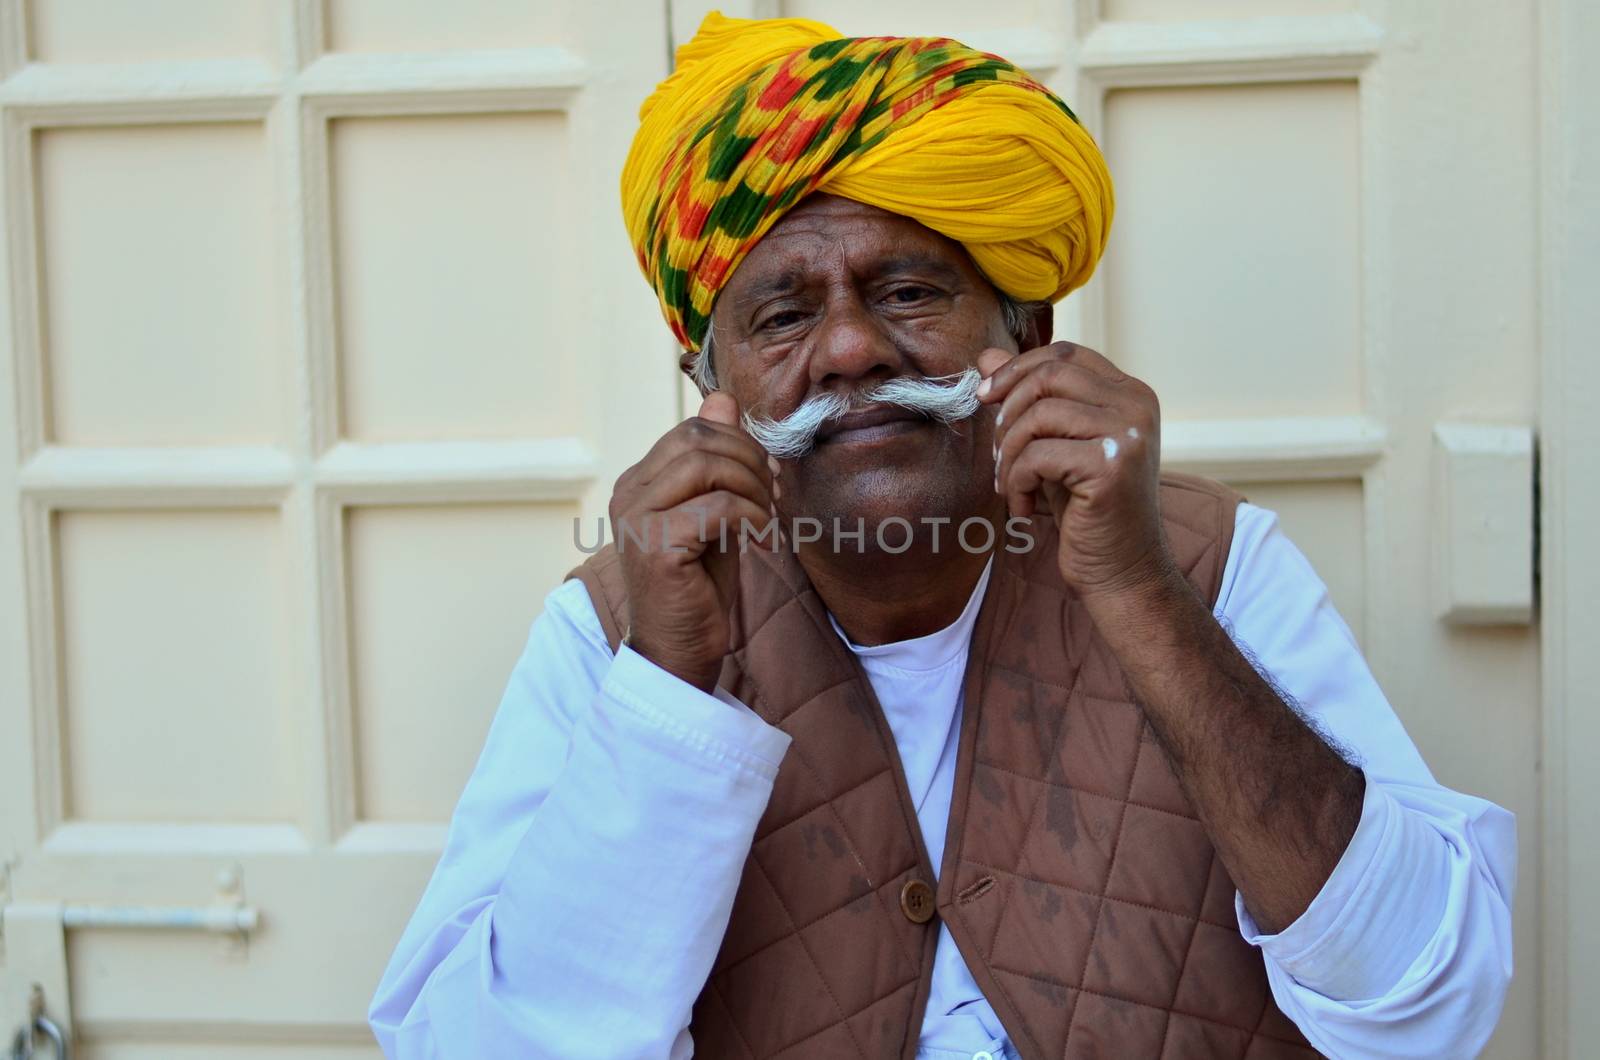 Jodhpur, Rajasthan, India, circa 2020. An old man cum gatekeeper wearing a yellow colorful turban showing off his mustache at the Mehrangarh Fort.